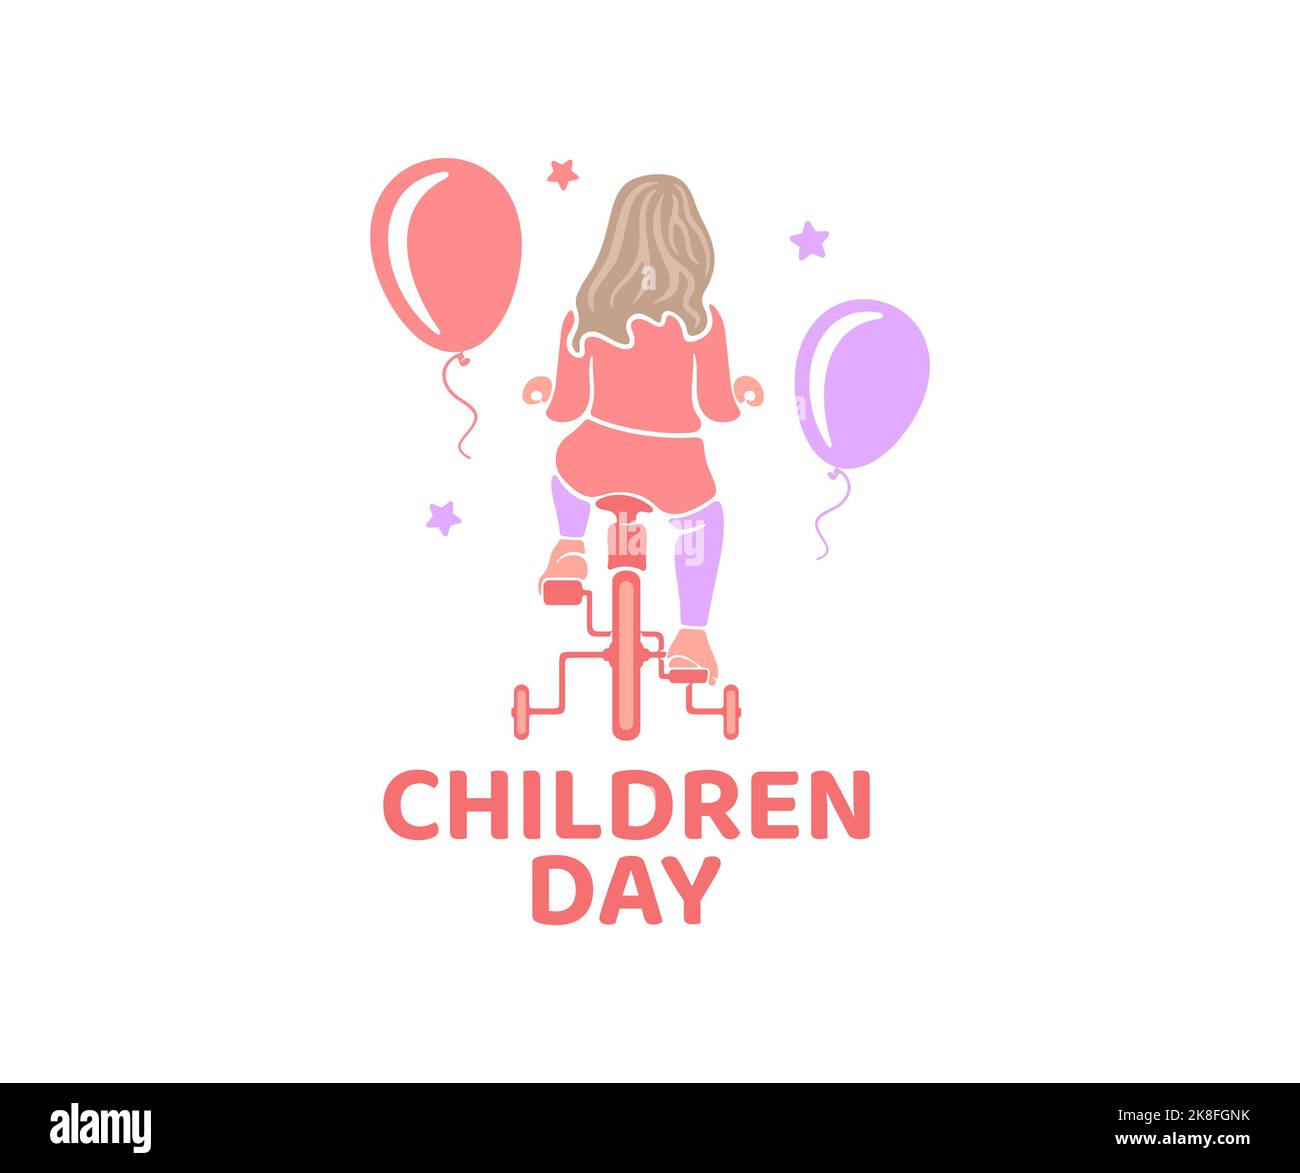 Child, little girl rides a bicycle, balloons and stars, logo design. Children's day, child playing and kindergarten, vector design and illustration Stock Vector